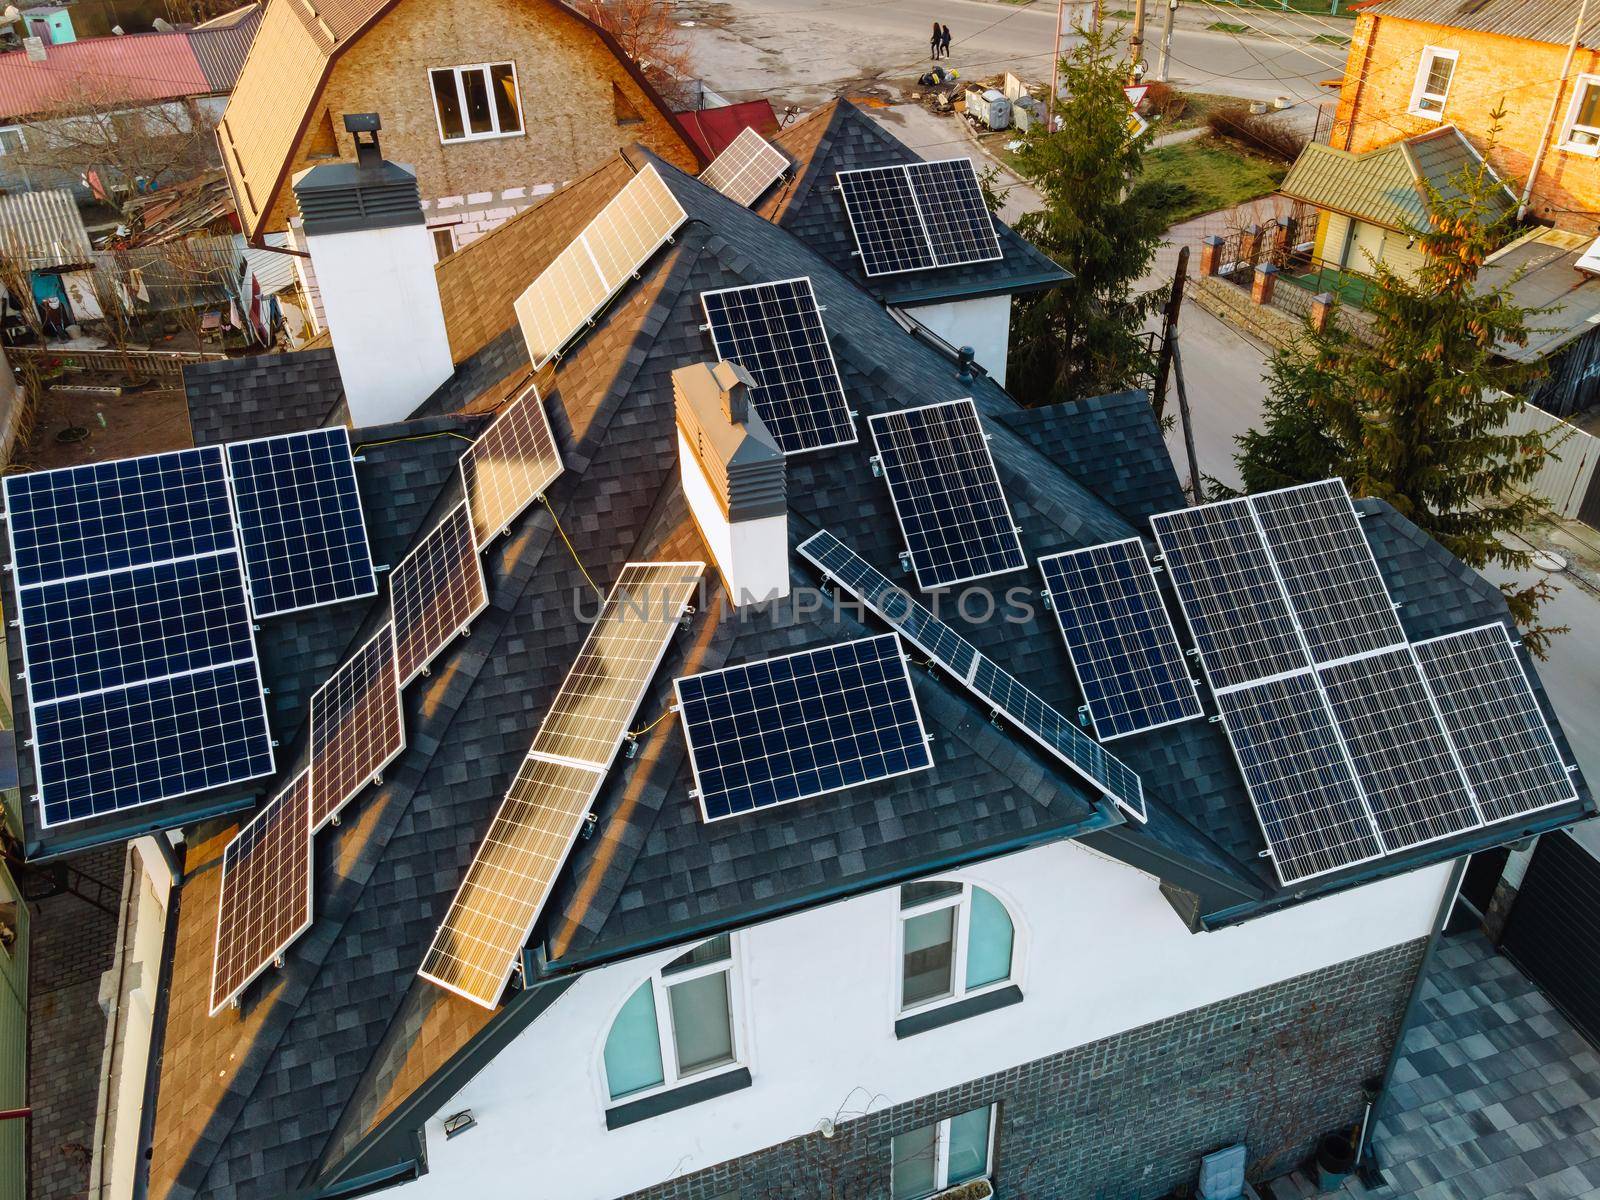 Aerial view of solar photovoltaic panels on a own house roof in small european city. Renewable green power concept